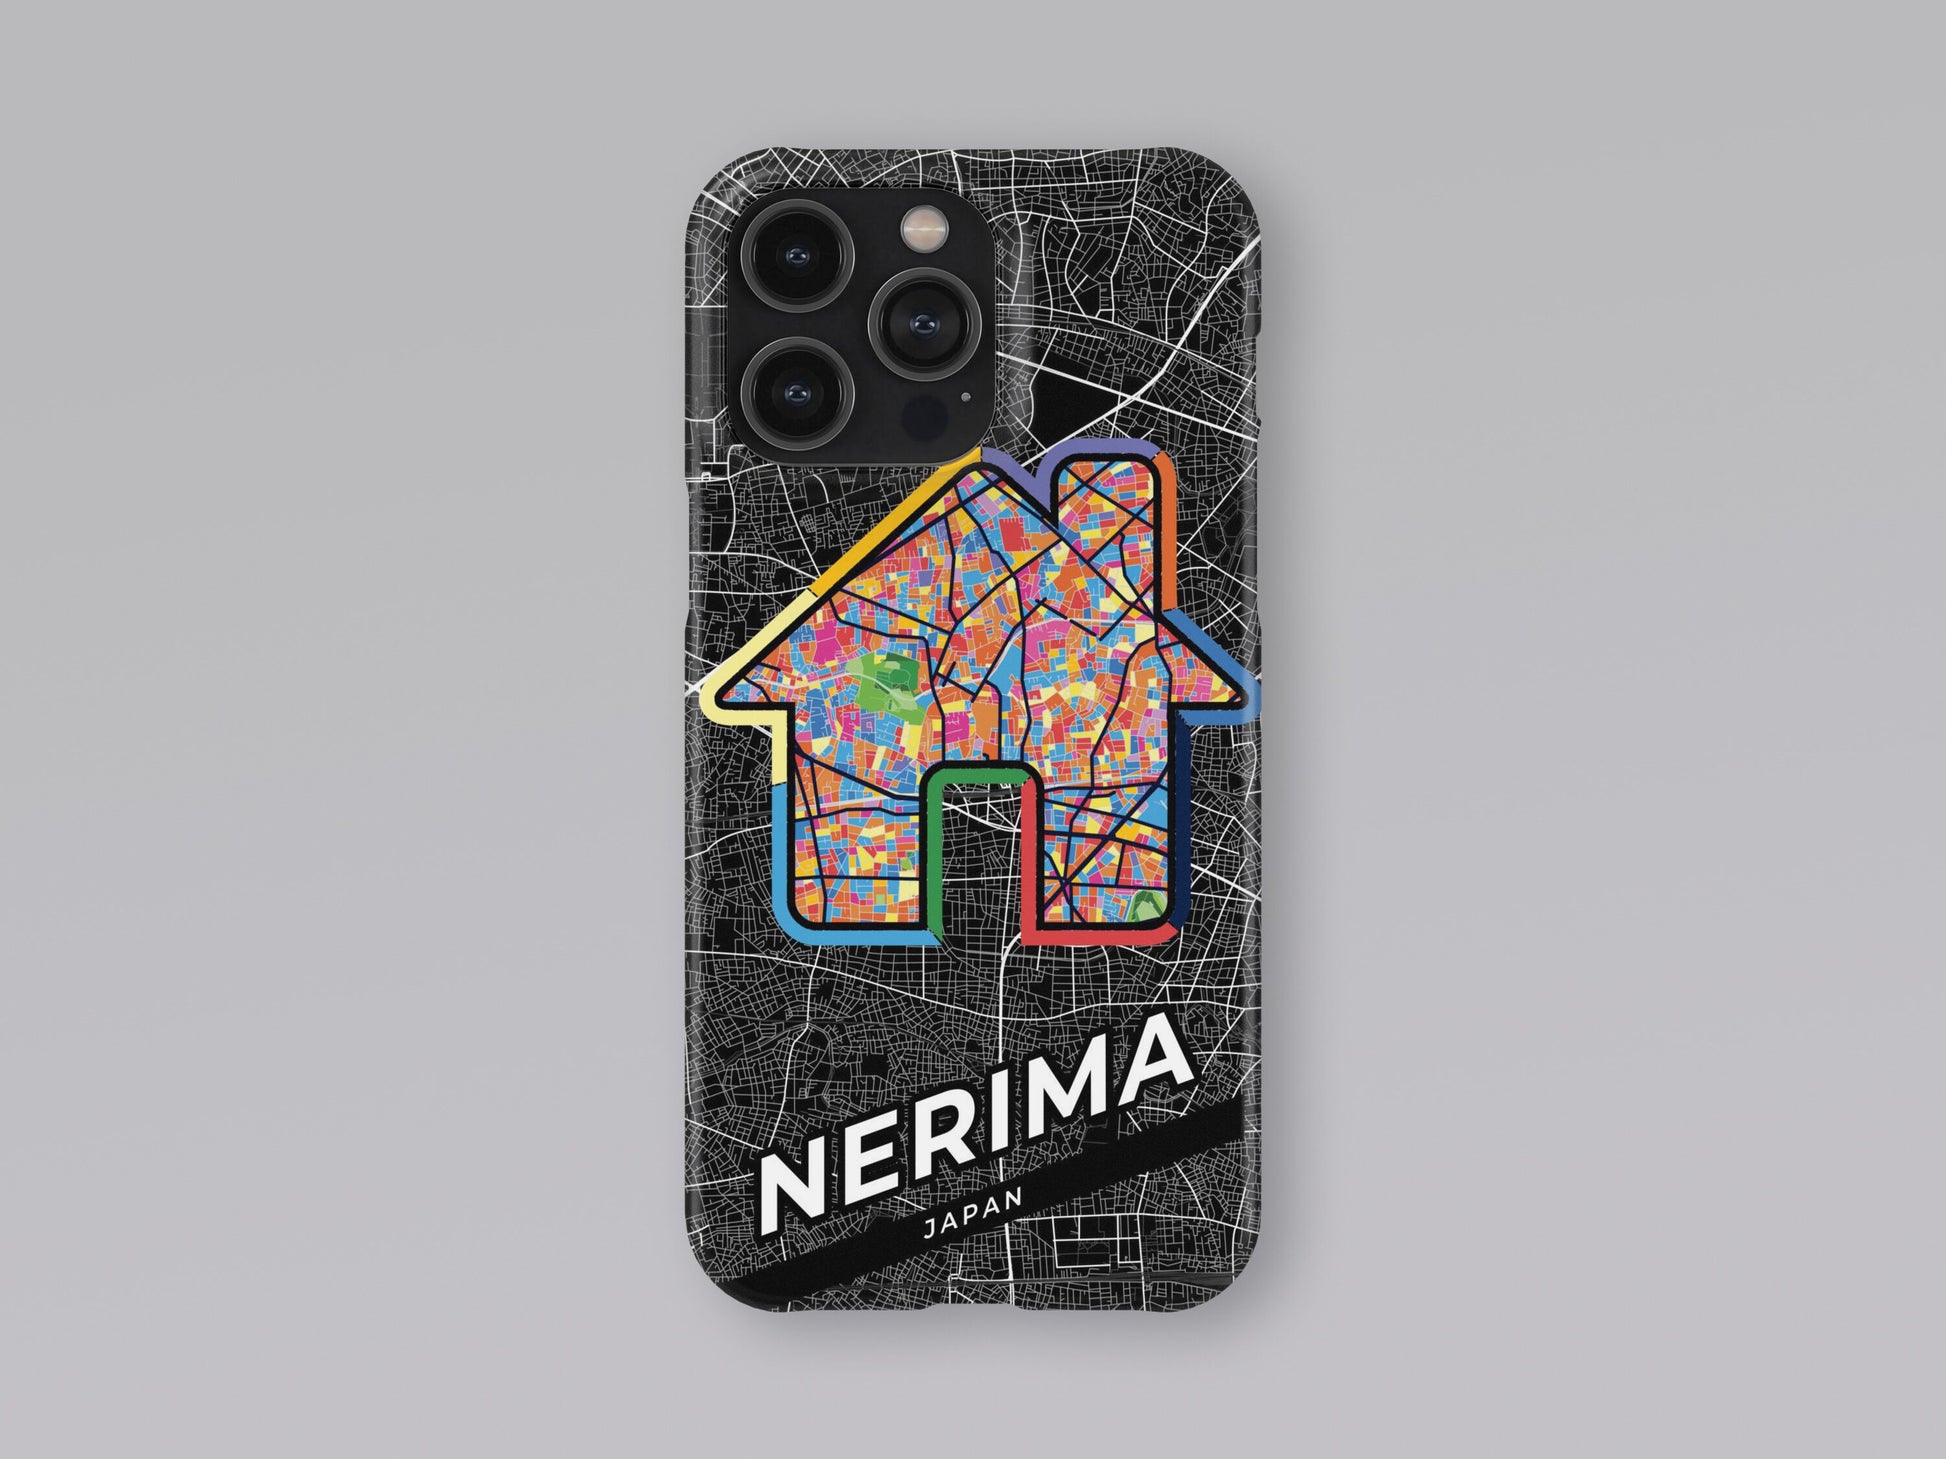 Nerima Japan slim phone case with colorful icon 3